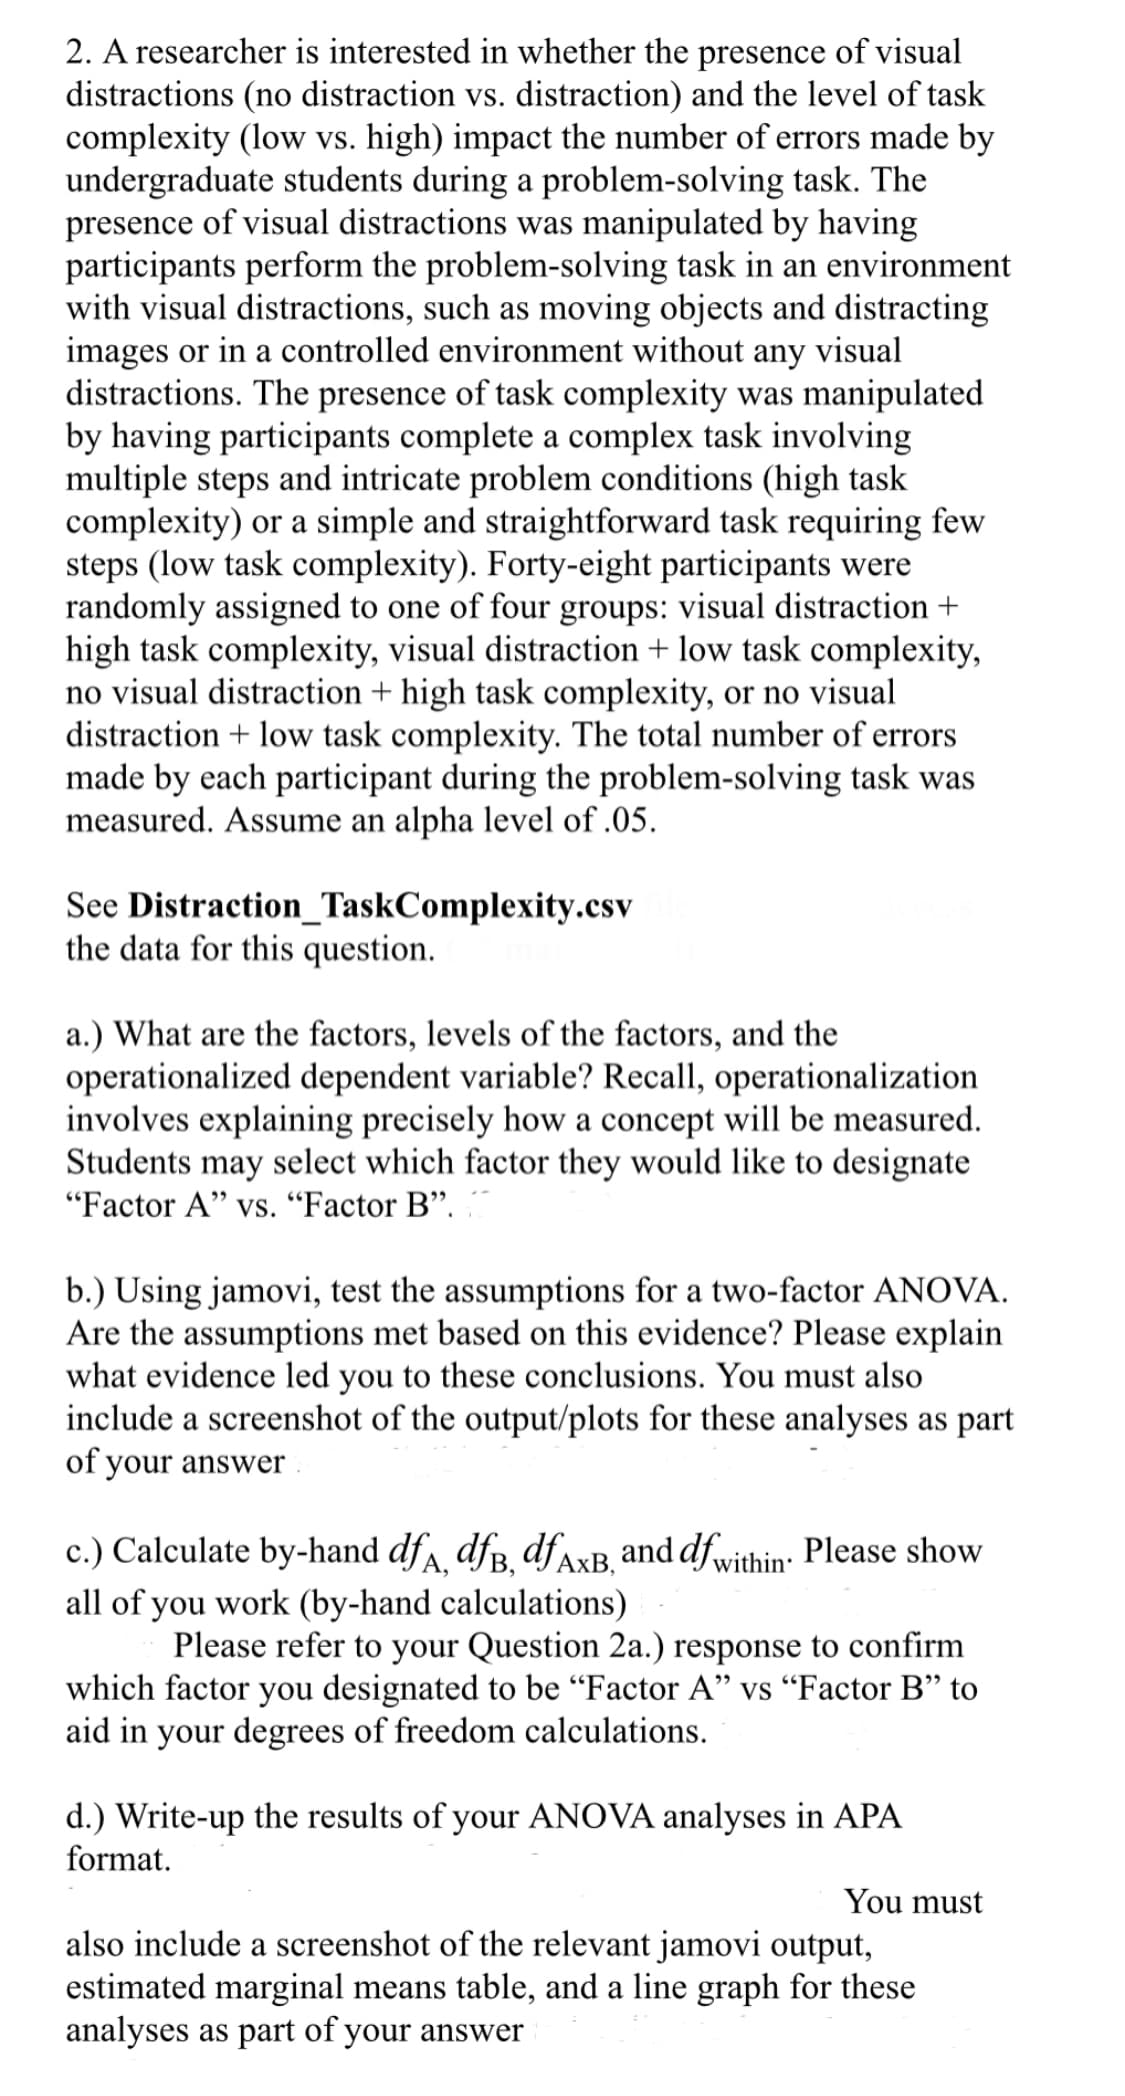 2. A researcher is interested in whether the presence of visual
distractions (no distraction vs. distraction) and the level of task
complexity (low vs. high) impact the number of errors made by
undergraduate students during a problem-solving task. The
presence of visual distractions was manipulated by having
participants perform the problem-solving task in an environment
with visual distractions, such as moving objects and distracting
images or in a controlled environment without any visual
distractions. The presence of task complexity was manipulated
by having participants complete a complex task involving
multiple steps and intricate problem conditions (high task
complexity) or a simple and straightforward task requiring few
steps (low task complexity). Forty-eight participants were
randomly assigned to one of four groups: visual distraction +
high task complexity, visual distraction + low task complexity,
no visual distraction + high task complexity, or no visual
distraction + low task complexity. The total number of errors
made by each participant during the problem-solving task was
measured. Assume an alpha level of .05.
See Distraction_TaskComplexity.csv
the data for this question.
a.) What are the factors, levels of the factors, and the
operationalized dependent variable? Recall, operationalization
involves explaining precisely how a concept will be measured.
Students may select which factor they would like to designate
"Factor A" vs. "Factor B".
b.) Using jamovi, test the assumptions for a two-factor ANOVA.
Are the assumptions met based on this evidence? Please explain
what evidence led you to these conclusions. You must also
include a screenshot of the output/plots for these analyses as part
of your answer
c.) Calculate by-hand dfA, dfB, df AXB, and df within. Please show
all of you work (by-hand calculations)
Please refer to your Question 2a.) response to confirm
which factor you designated to be "Factor A" vs "Factor B" to
aid in your degrees of freedom calculations.
d.) Write-up the results of your ANOVA analyses in APA
format.
You must
also include a screenshot of the relevant jamovi output,
estimated marginal means table, and a line graph for these
analyses as part of your answer